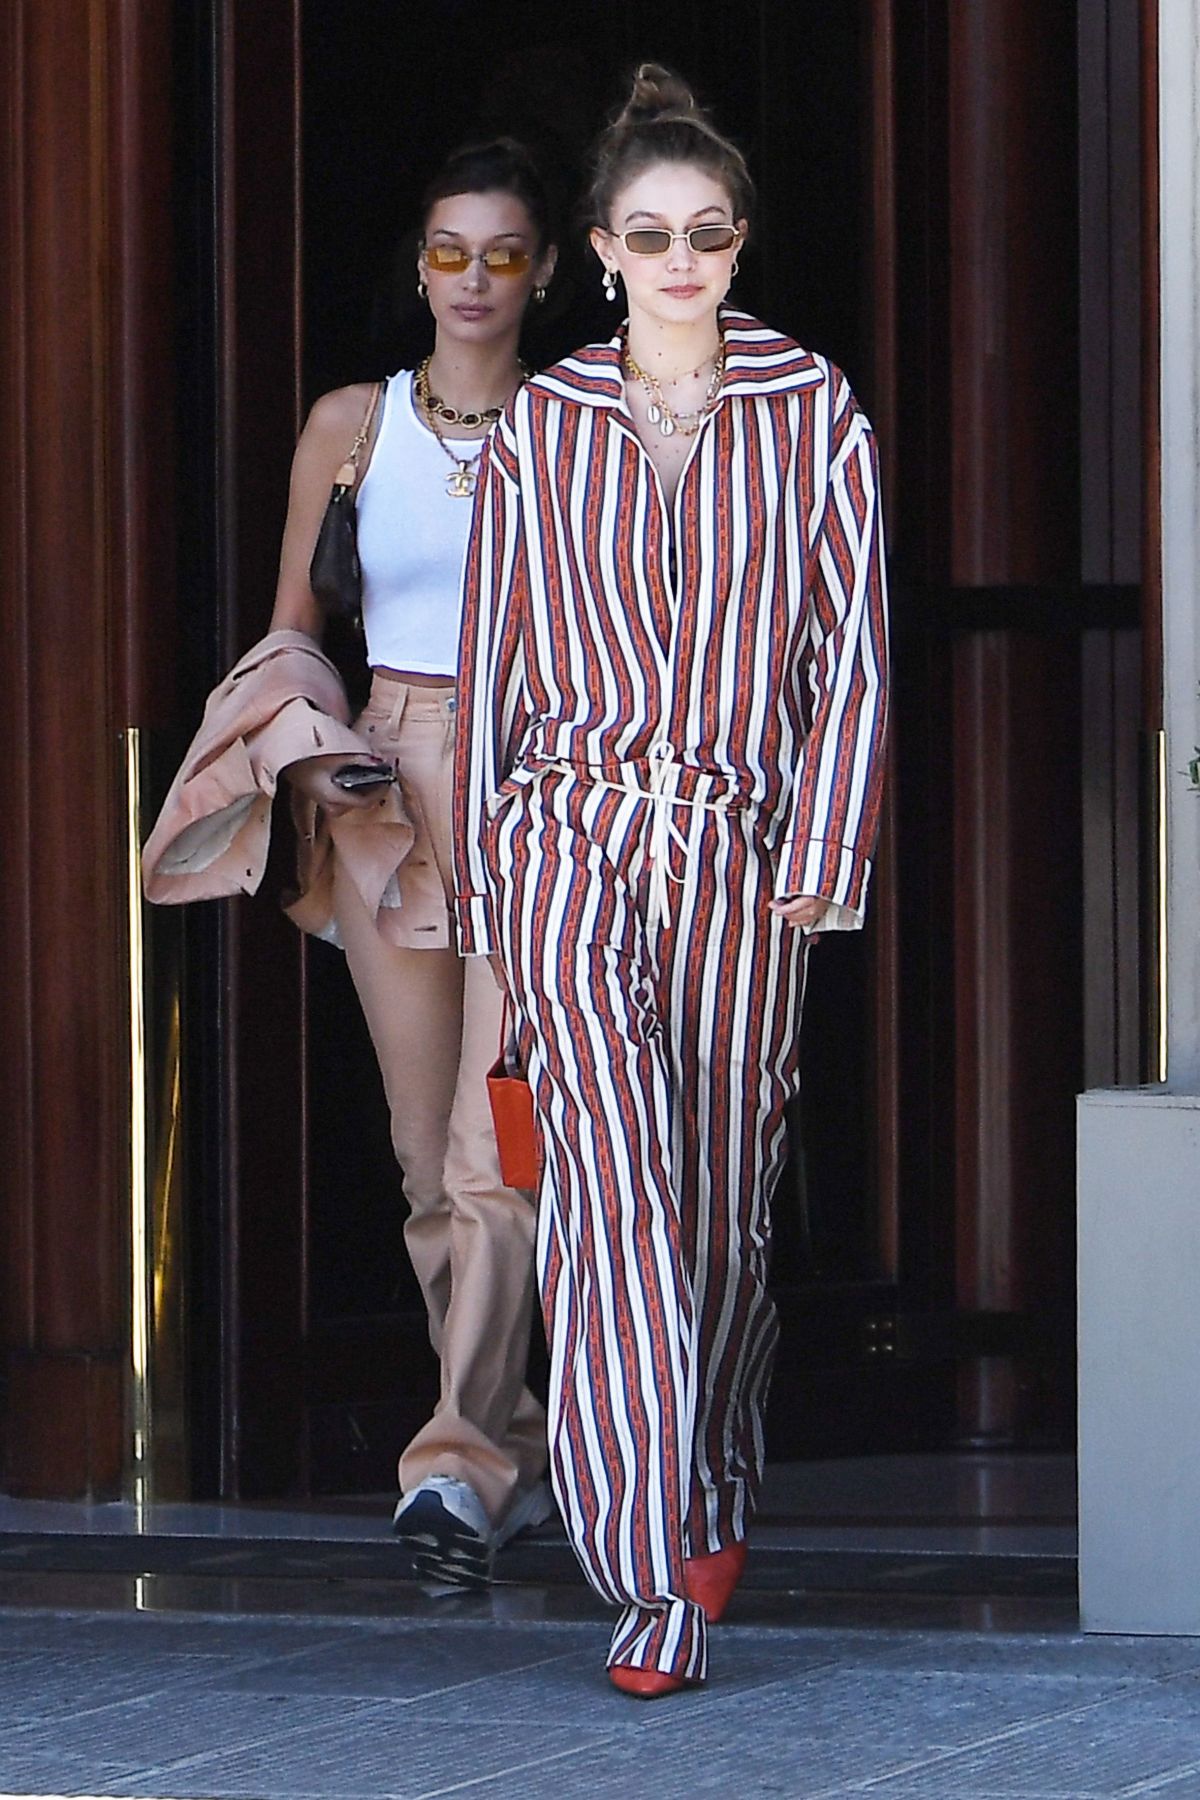 gigi-and-bella-hadid-out-in-florence-06-13-2019-4.jpg